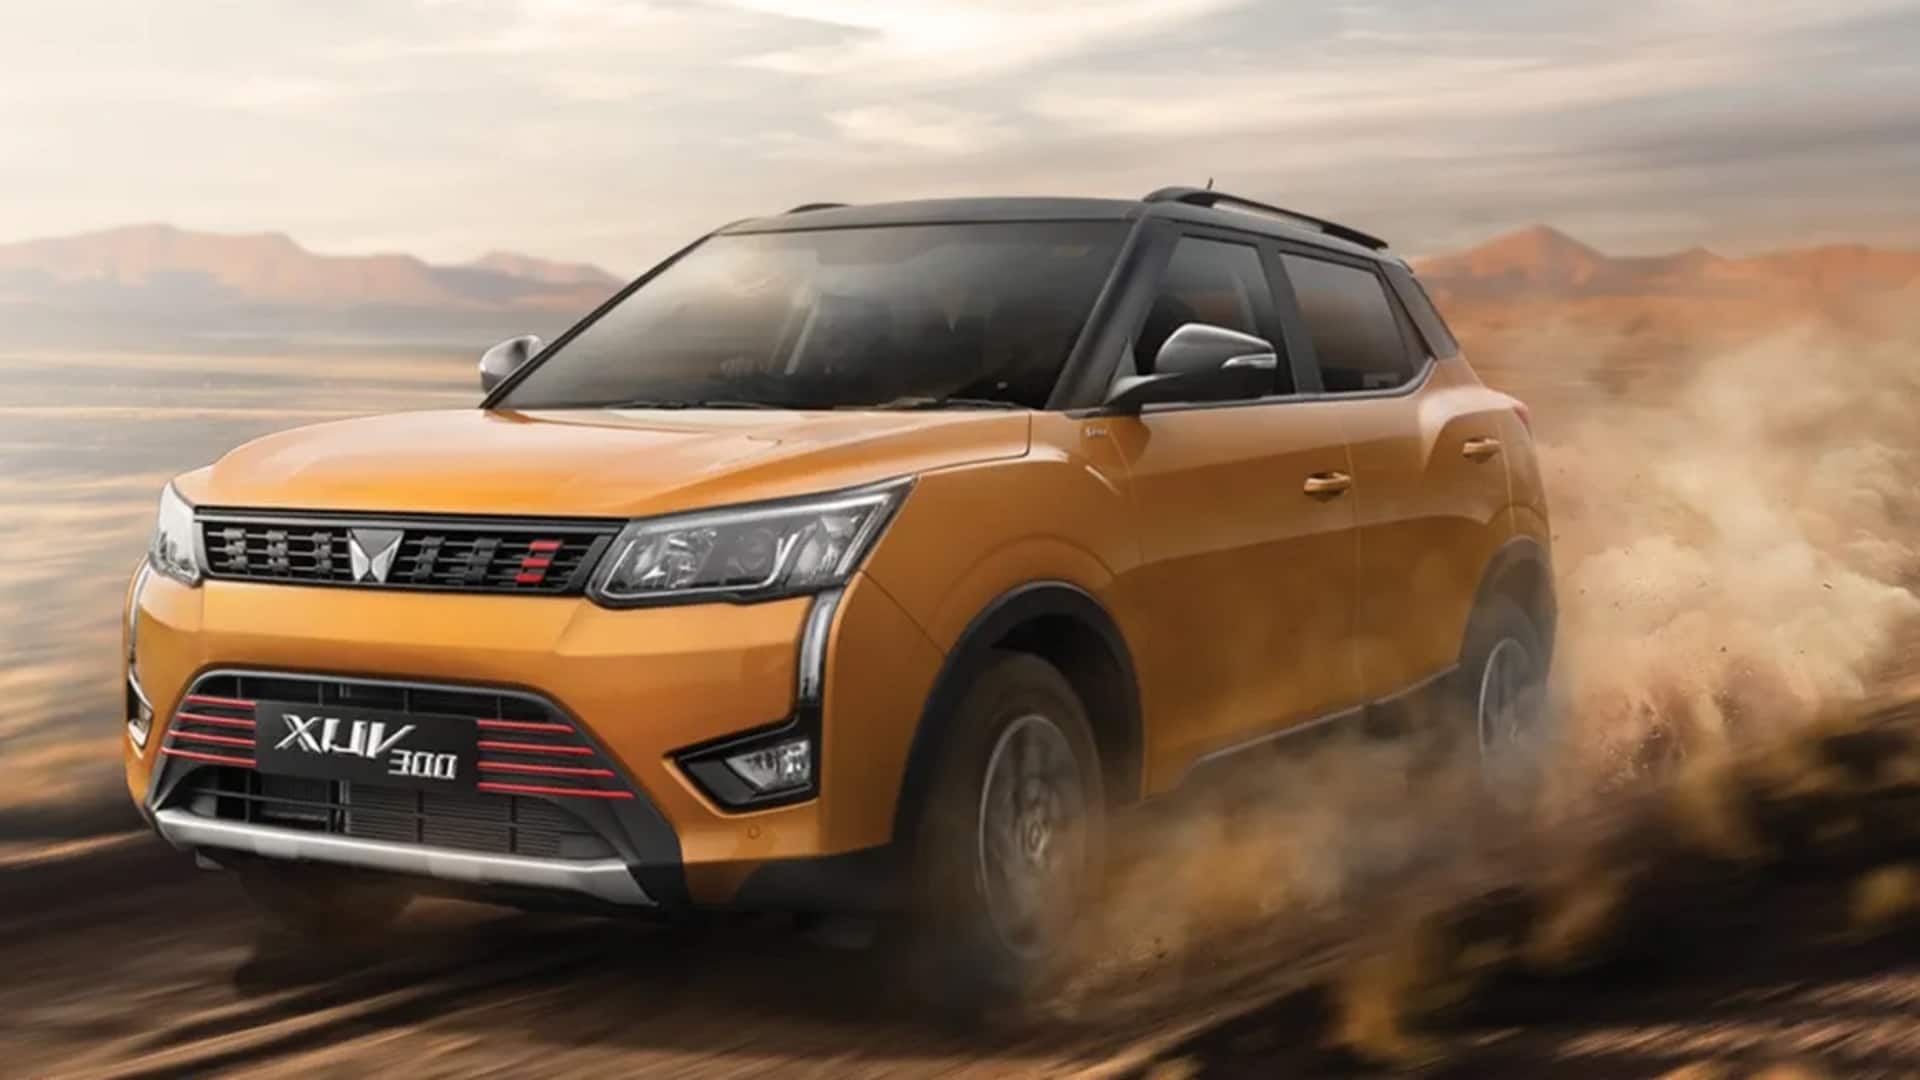 Mahindra XUV300 (facelift) in works: What to expect